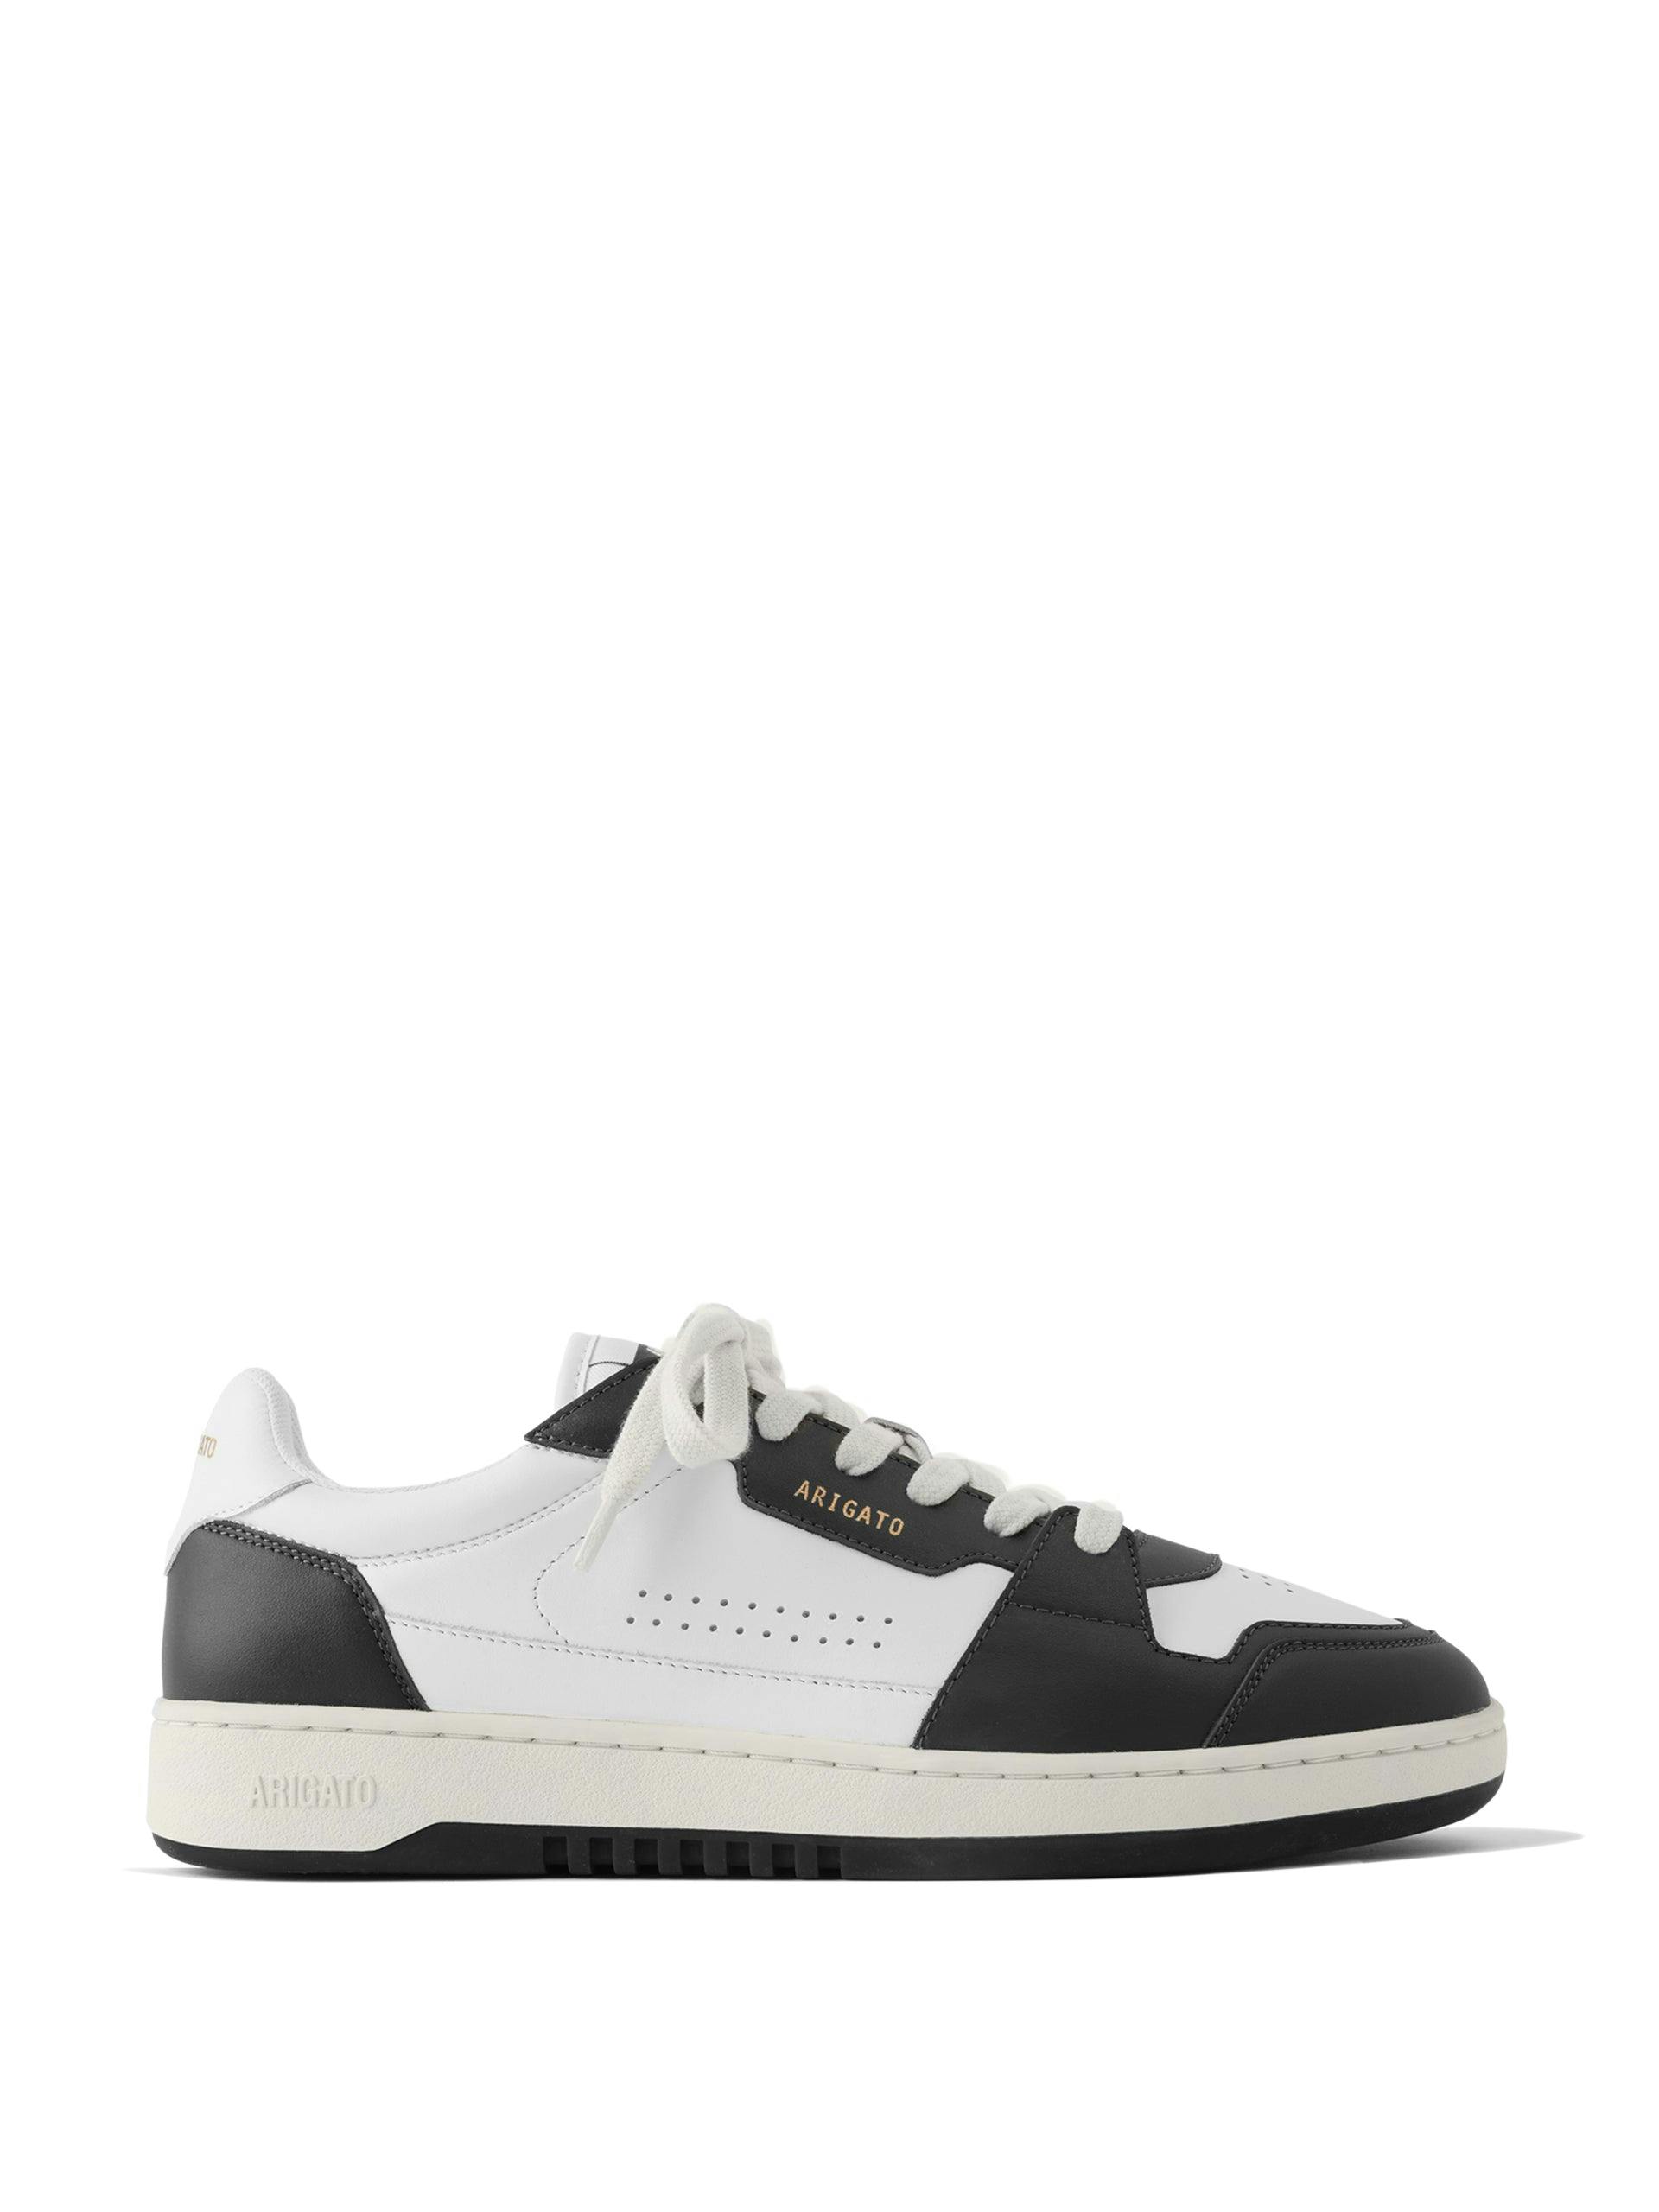 Black and white leather trainers